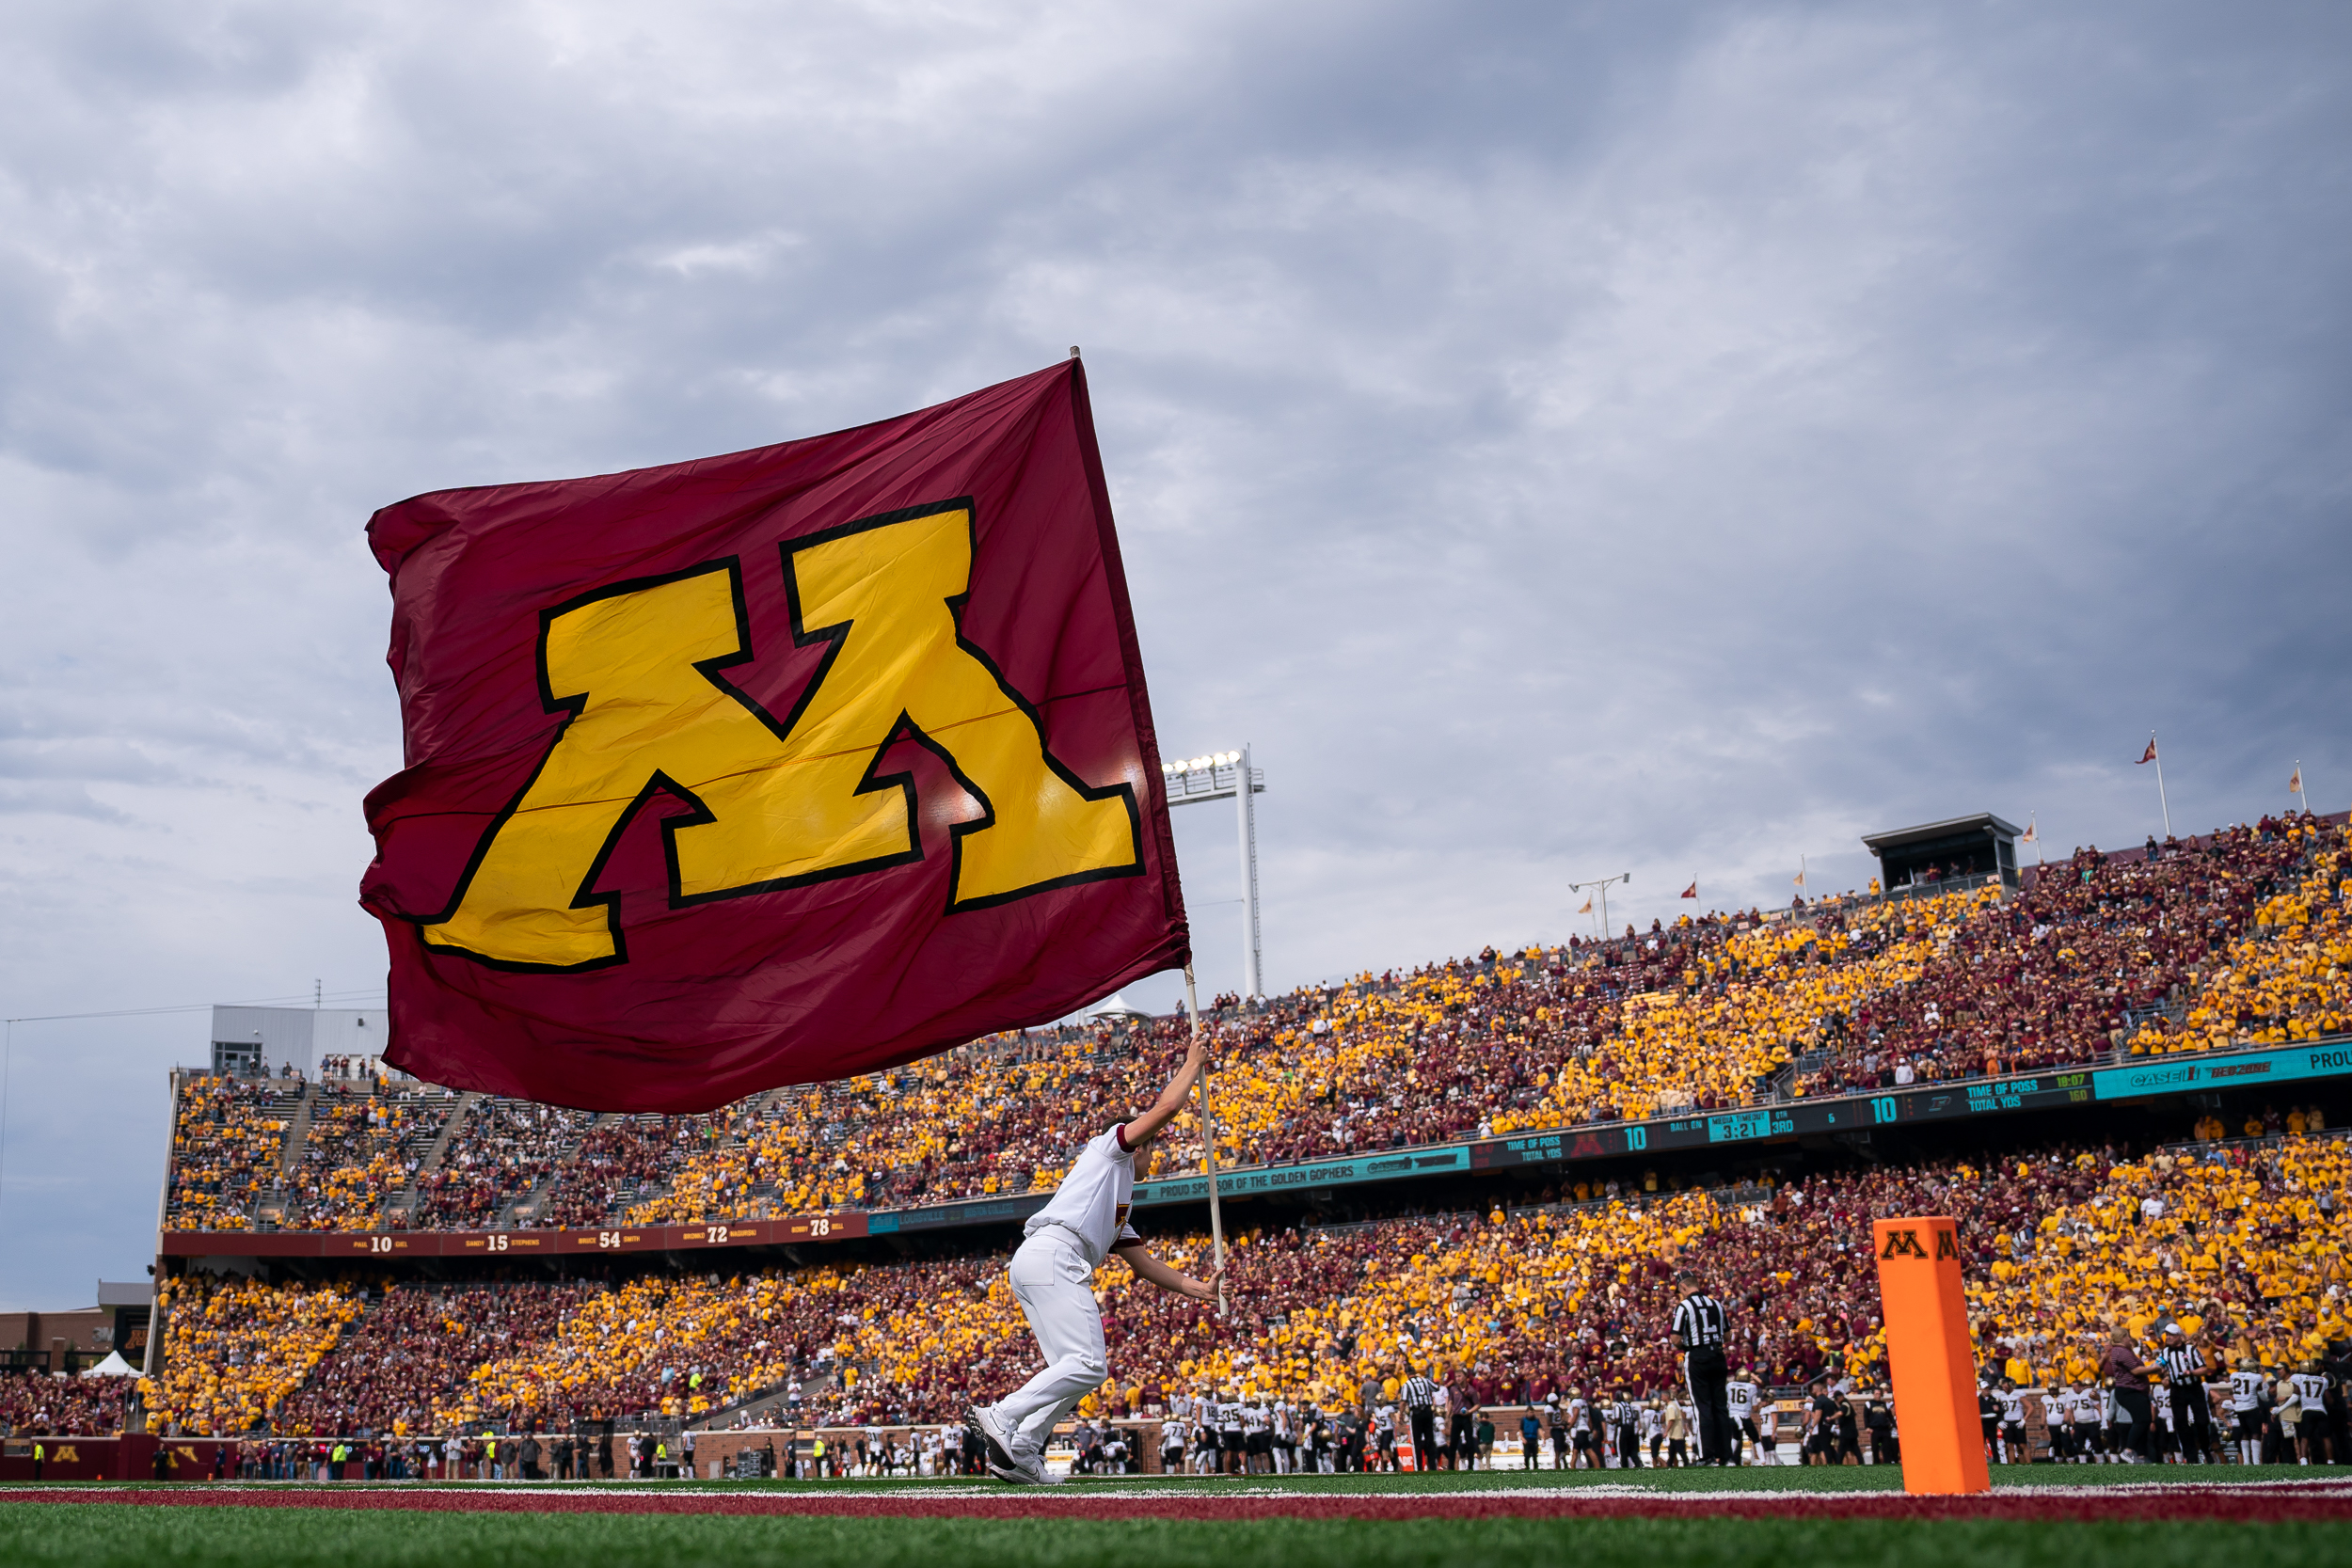 Gophers announce two open practices for fans in August